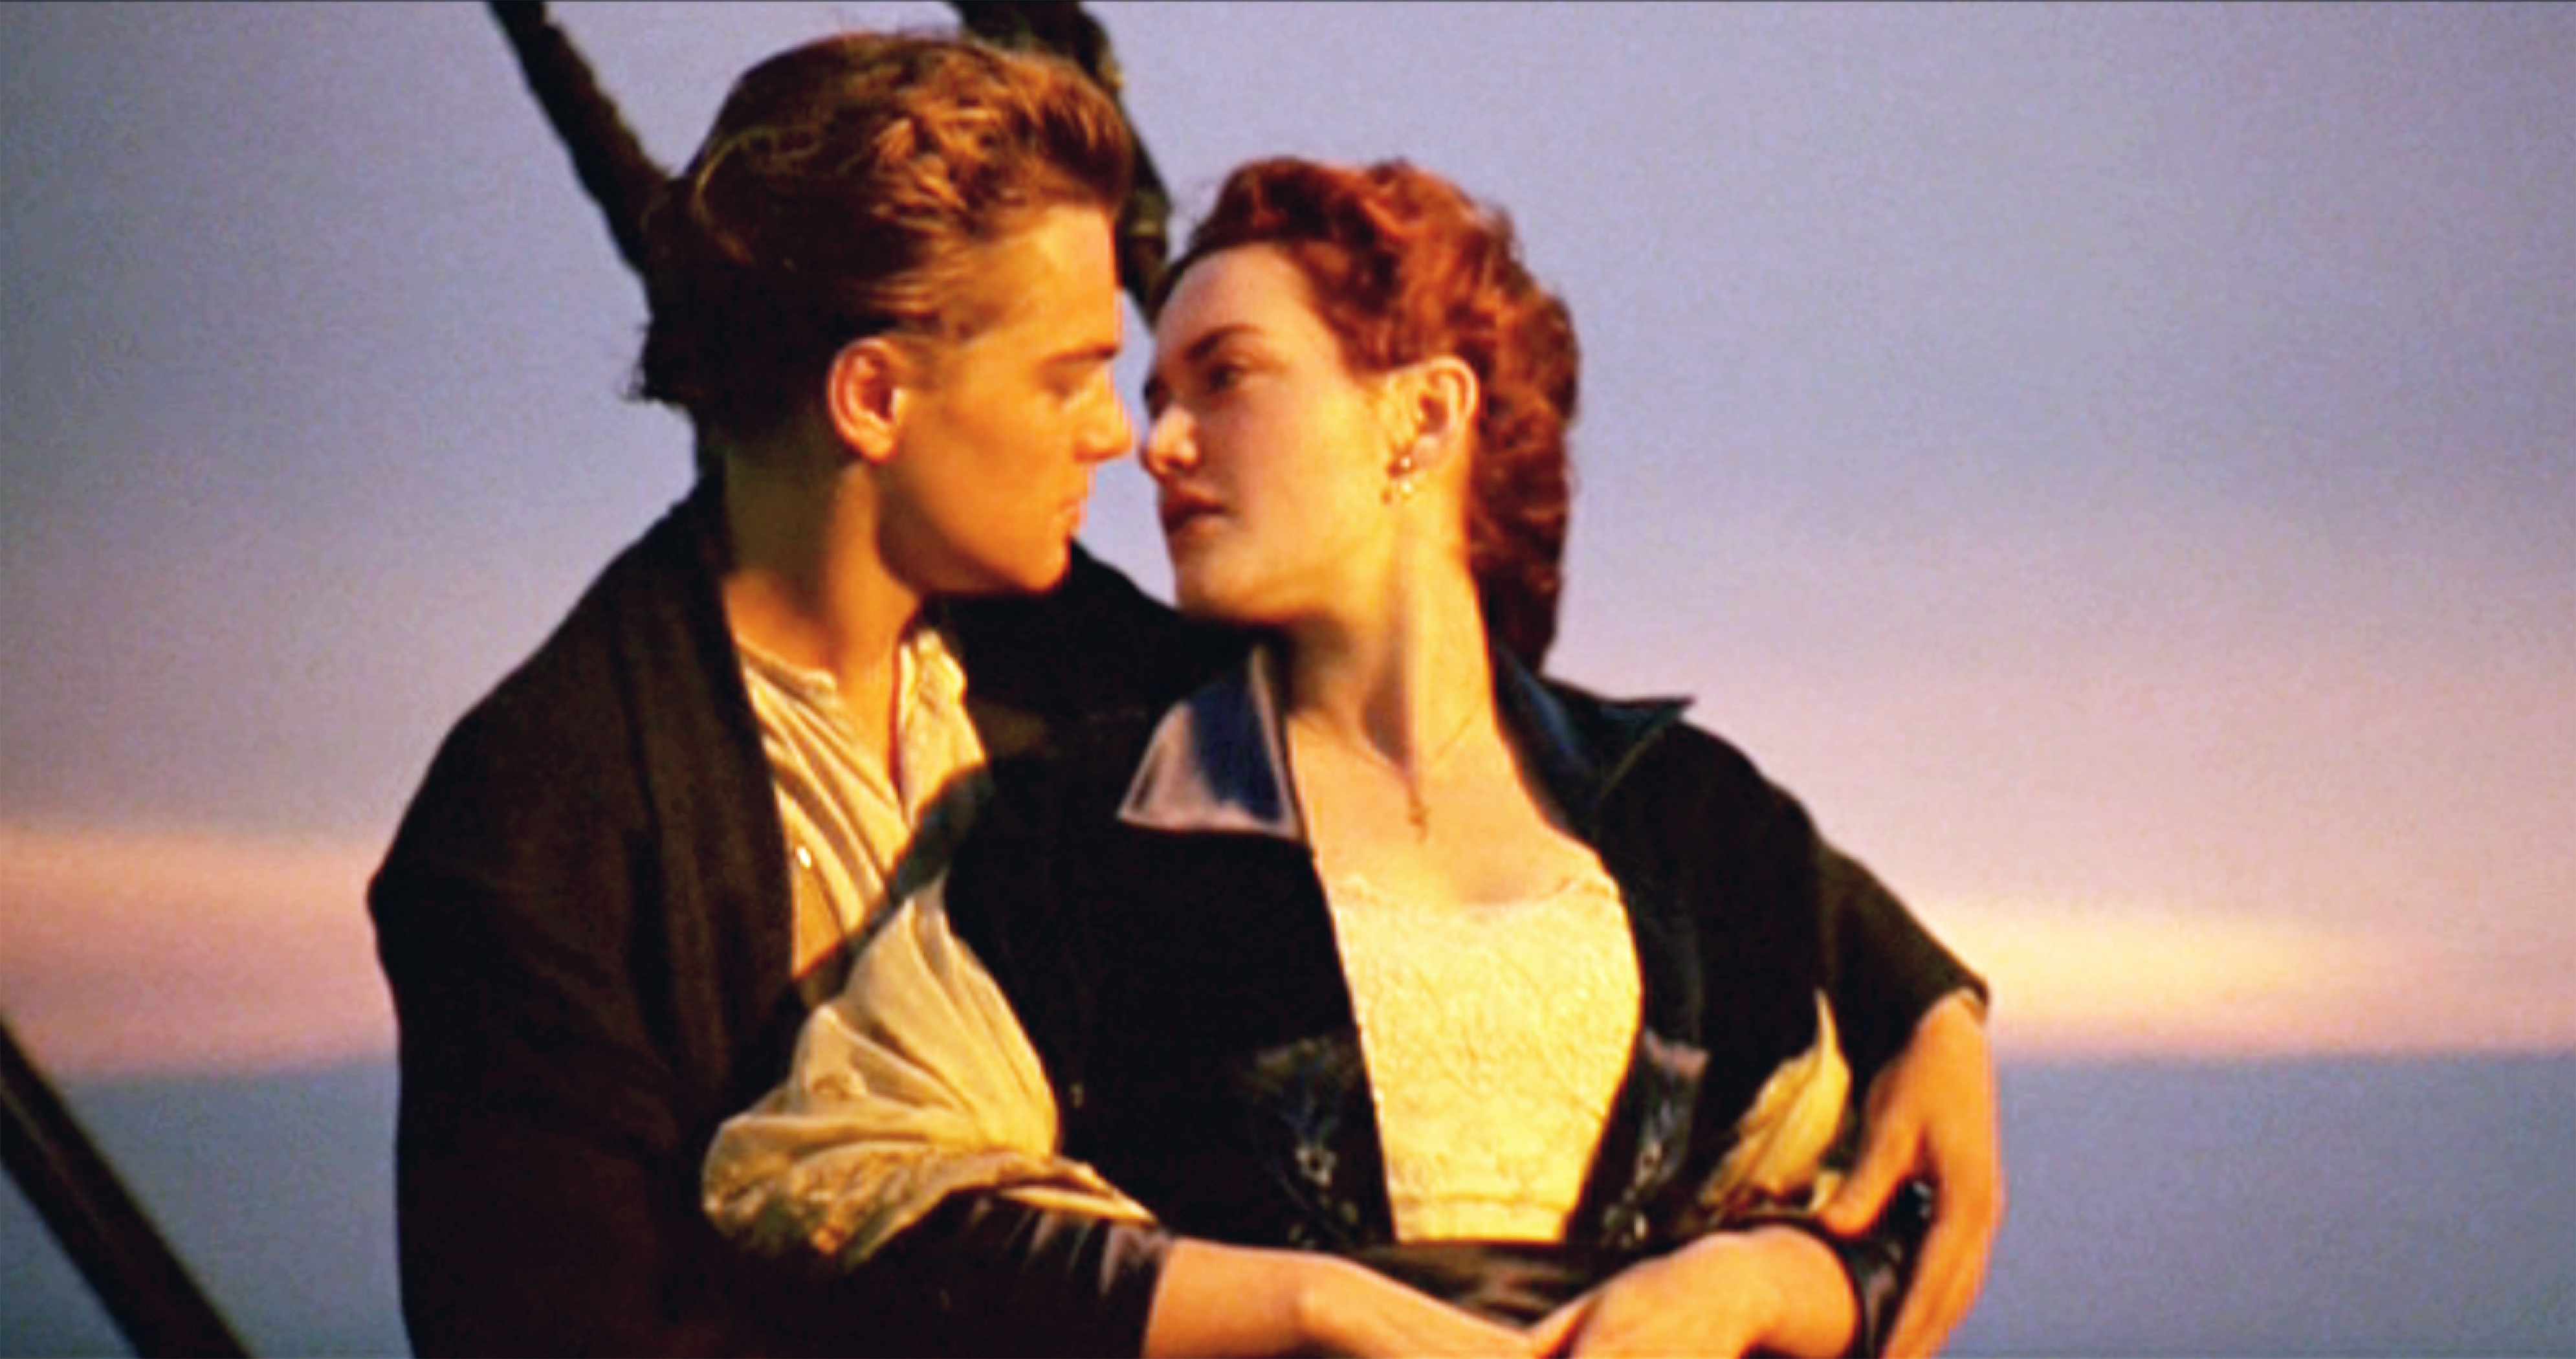 Leo and Kate embracing on the Titanic